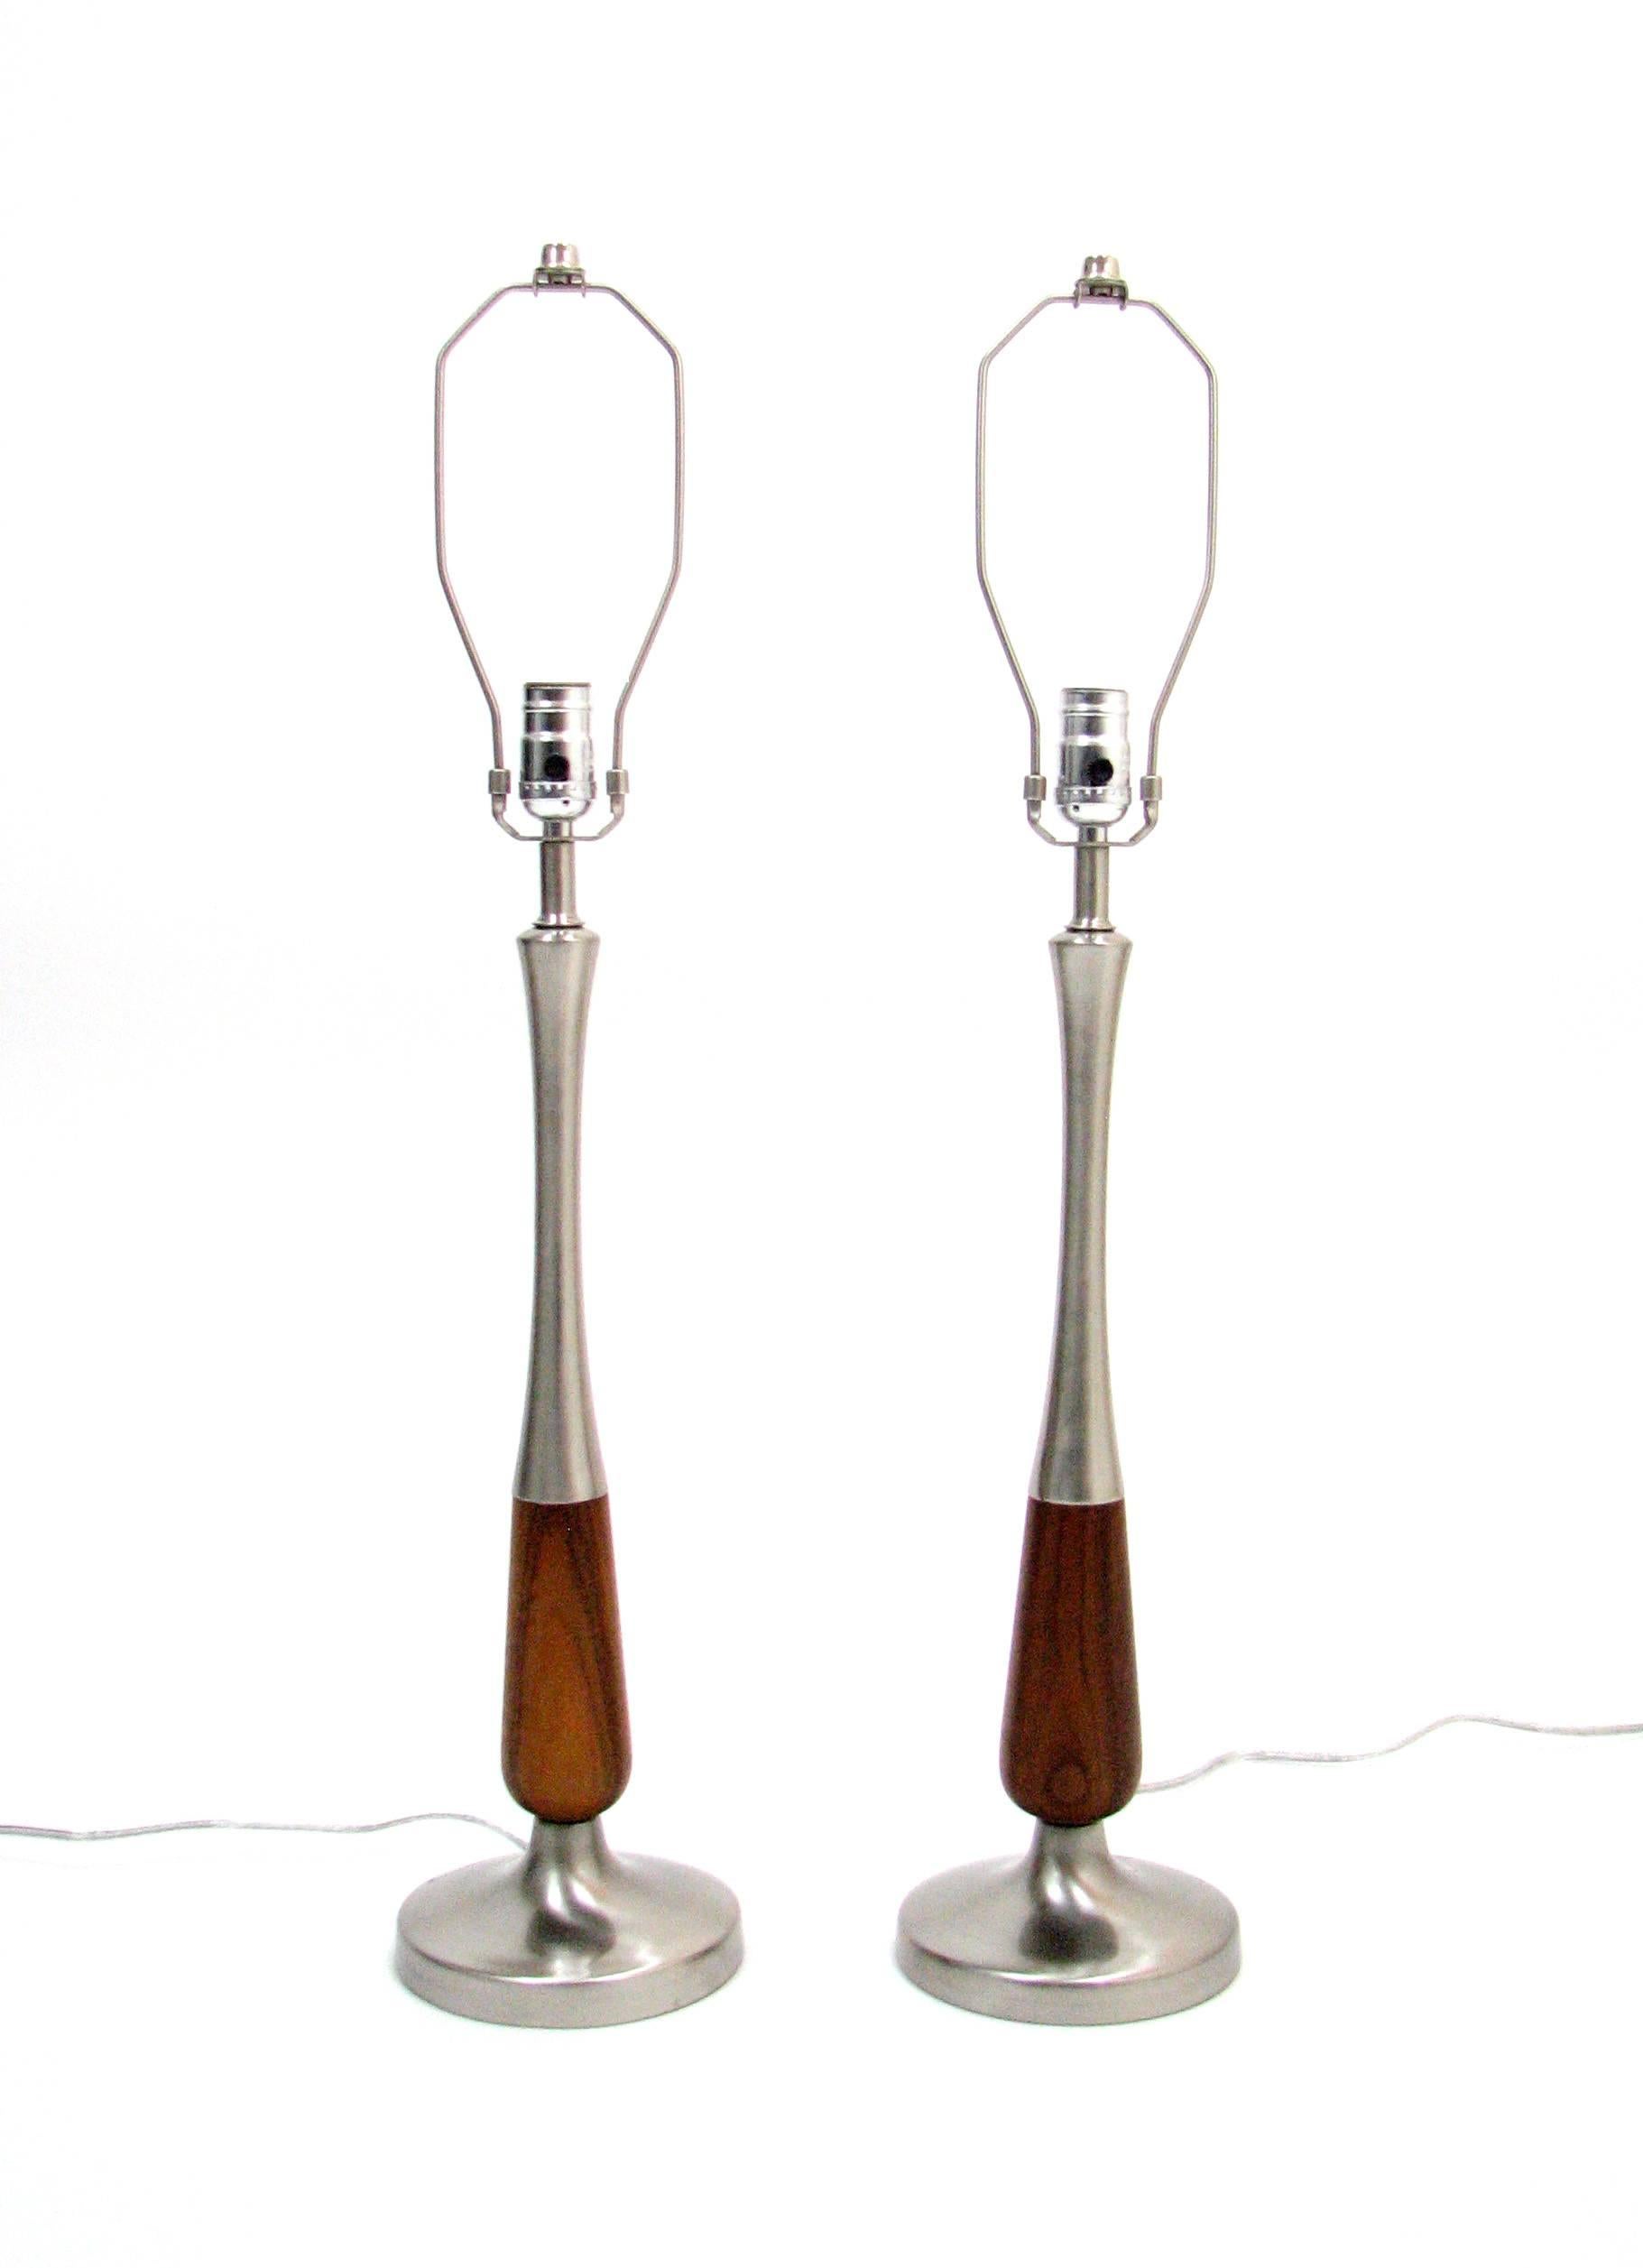 A beautiful pair of Midcentury walnut and brushed nickel lamps.  Originally plated in brass, the molded steel sections have been re-plated in brushed nickel and the walnut has been refinished for new life in the 21st century.

These lamps are 20